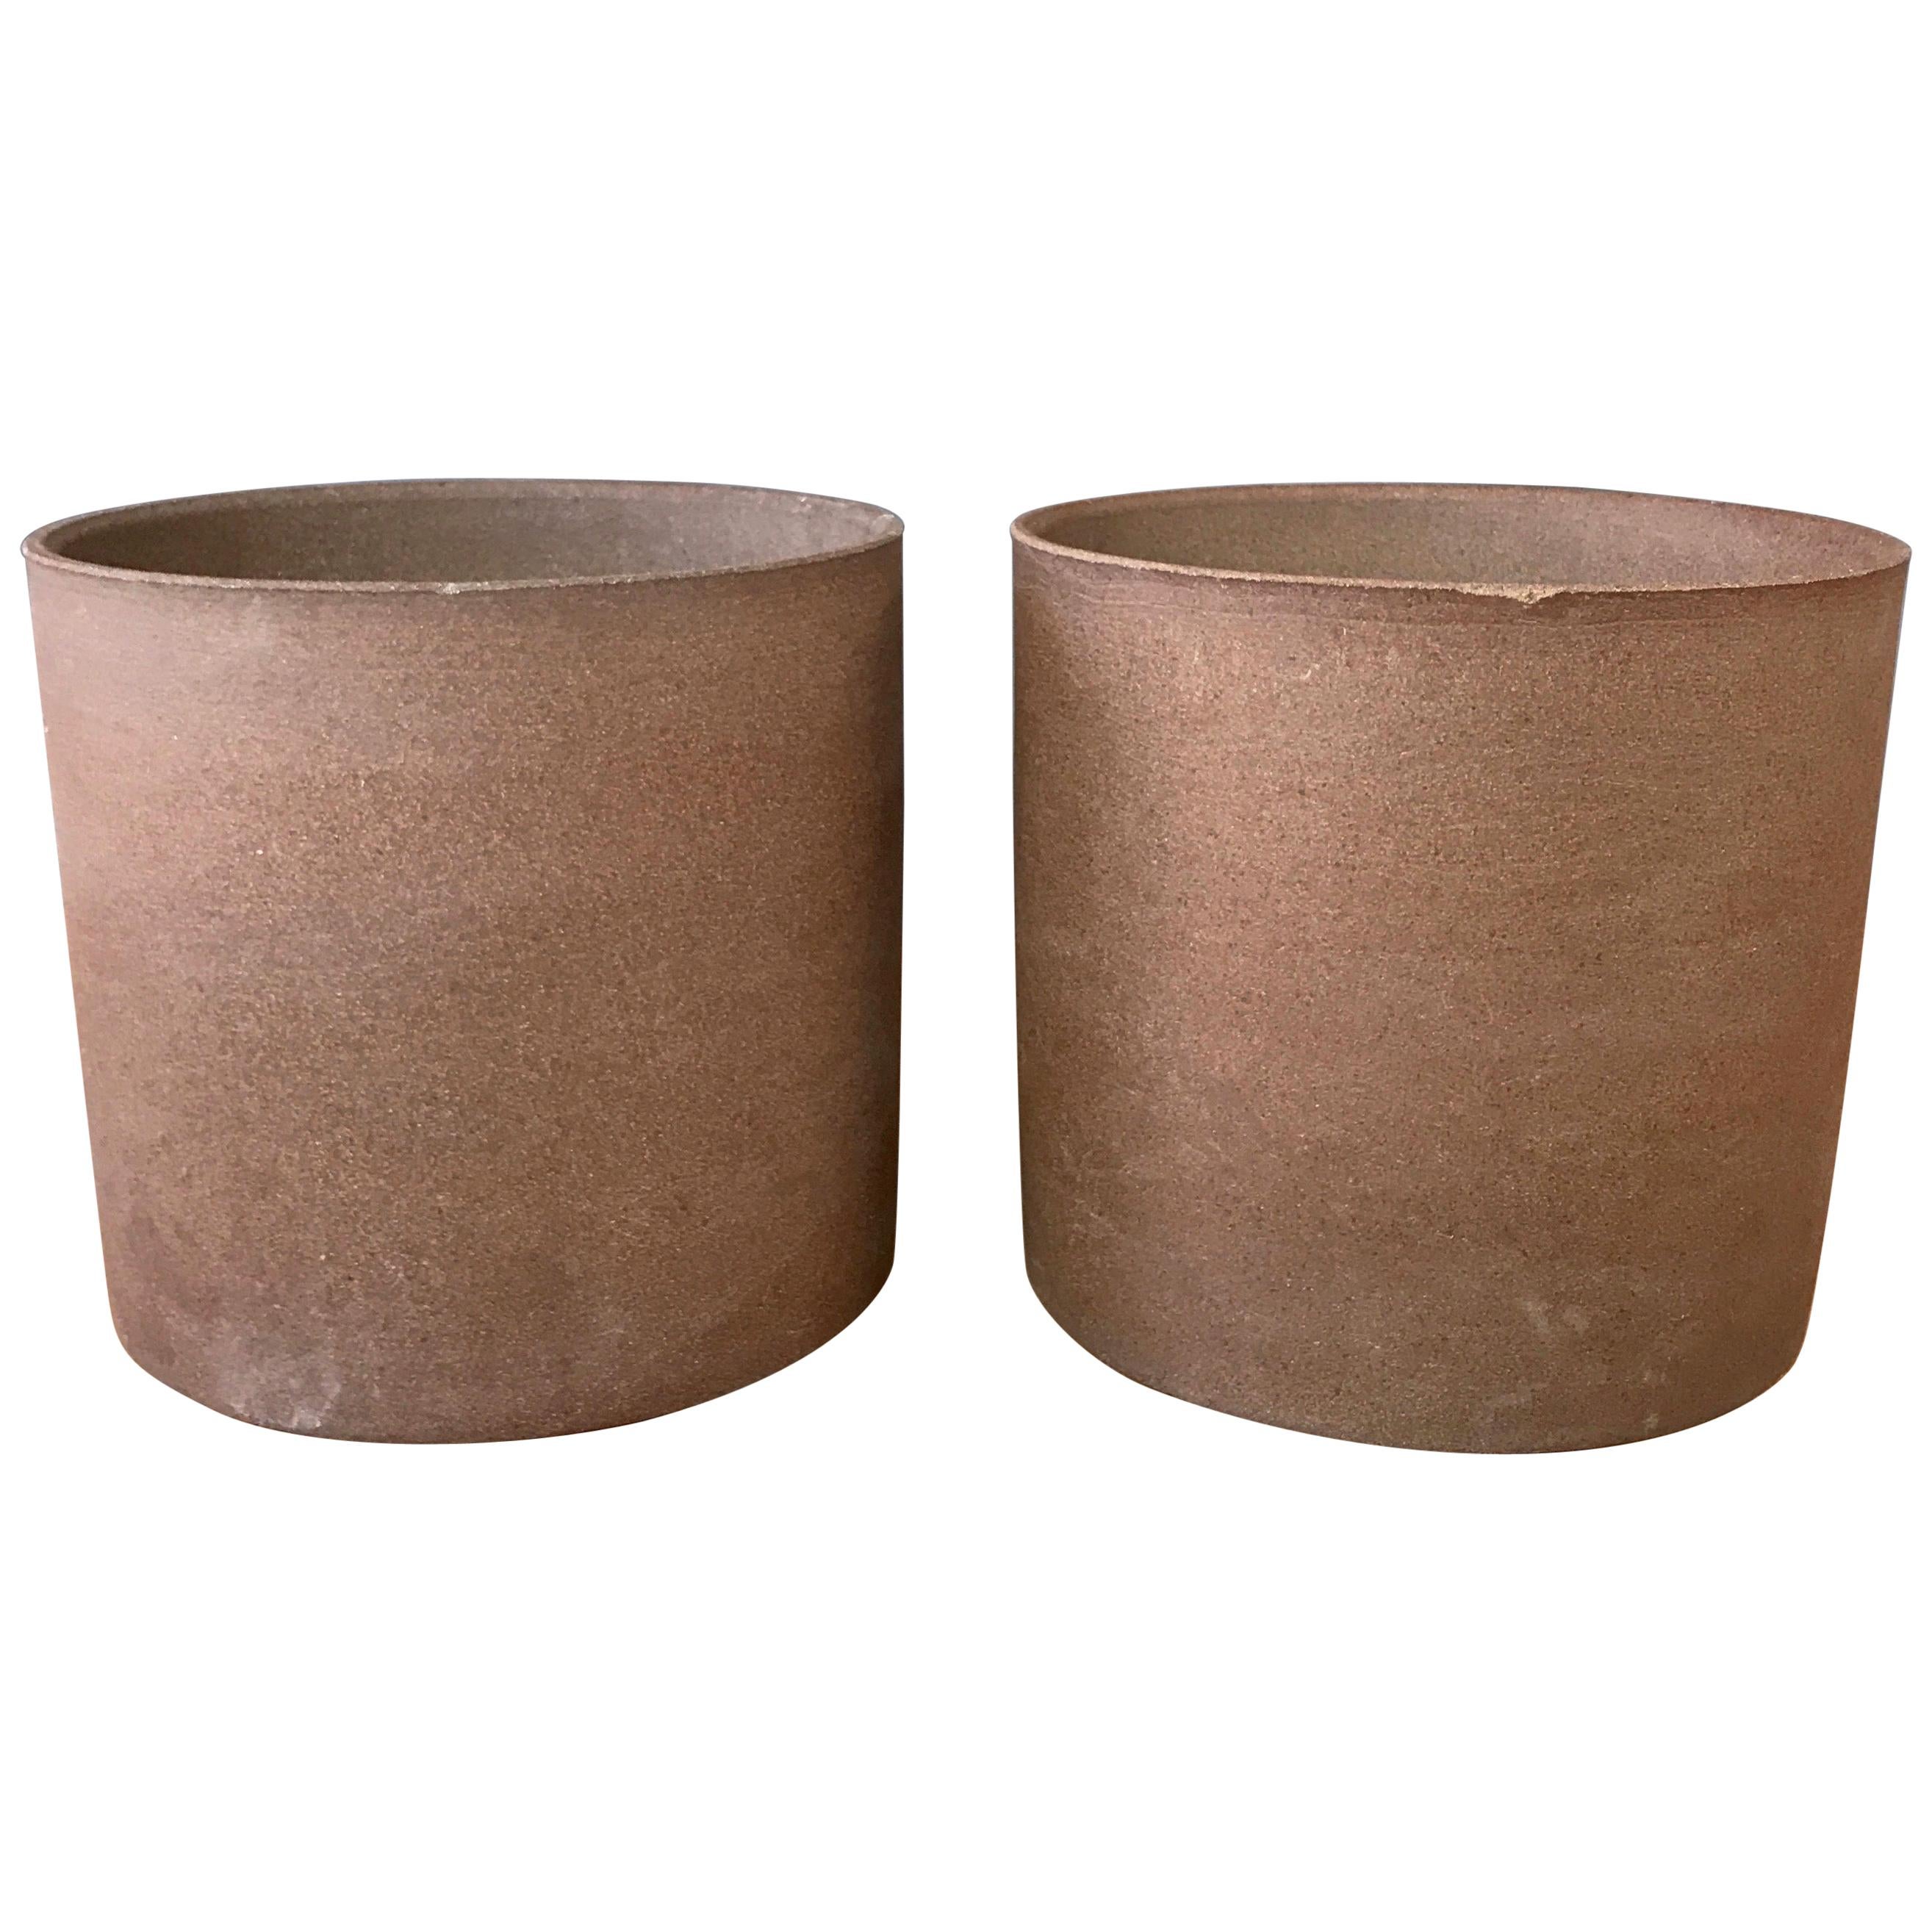 David Cressey Pro/Artisan for Architectural Pottery Large Planters, 7 Available